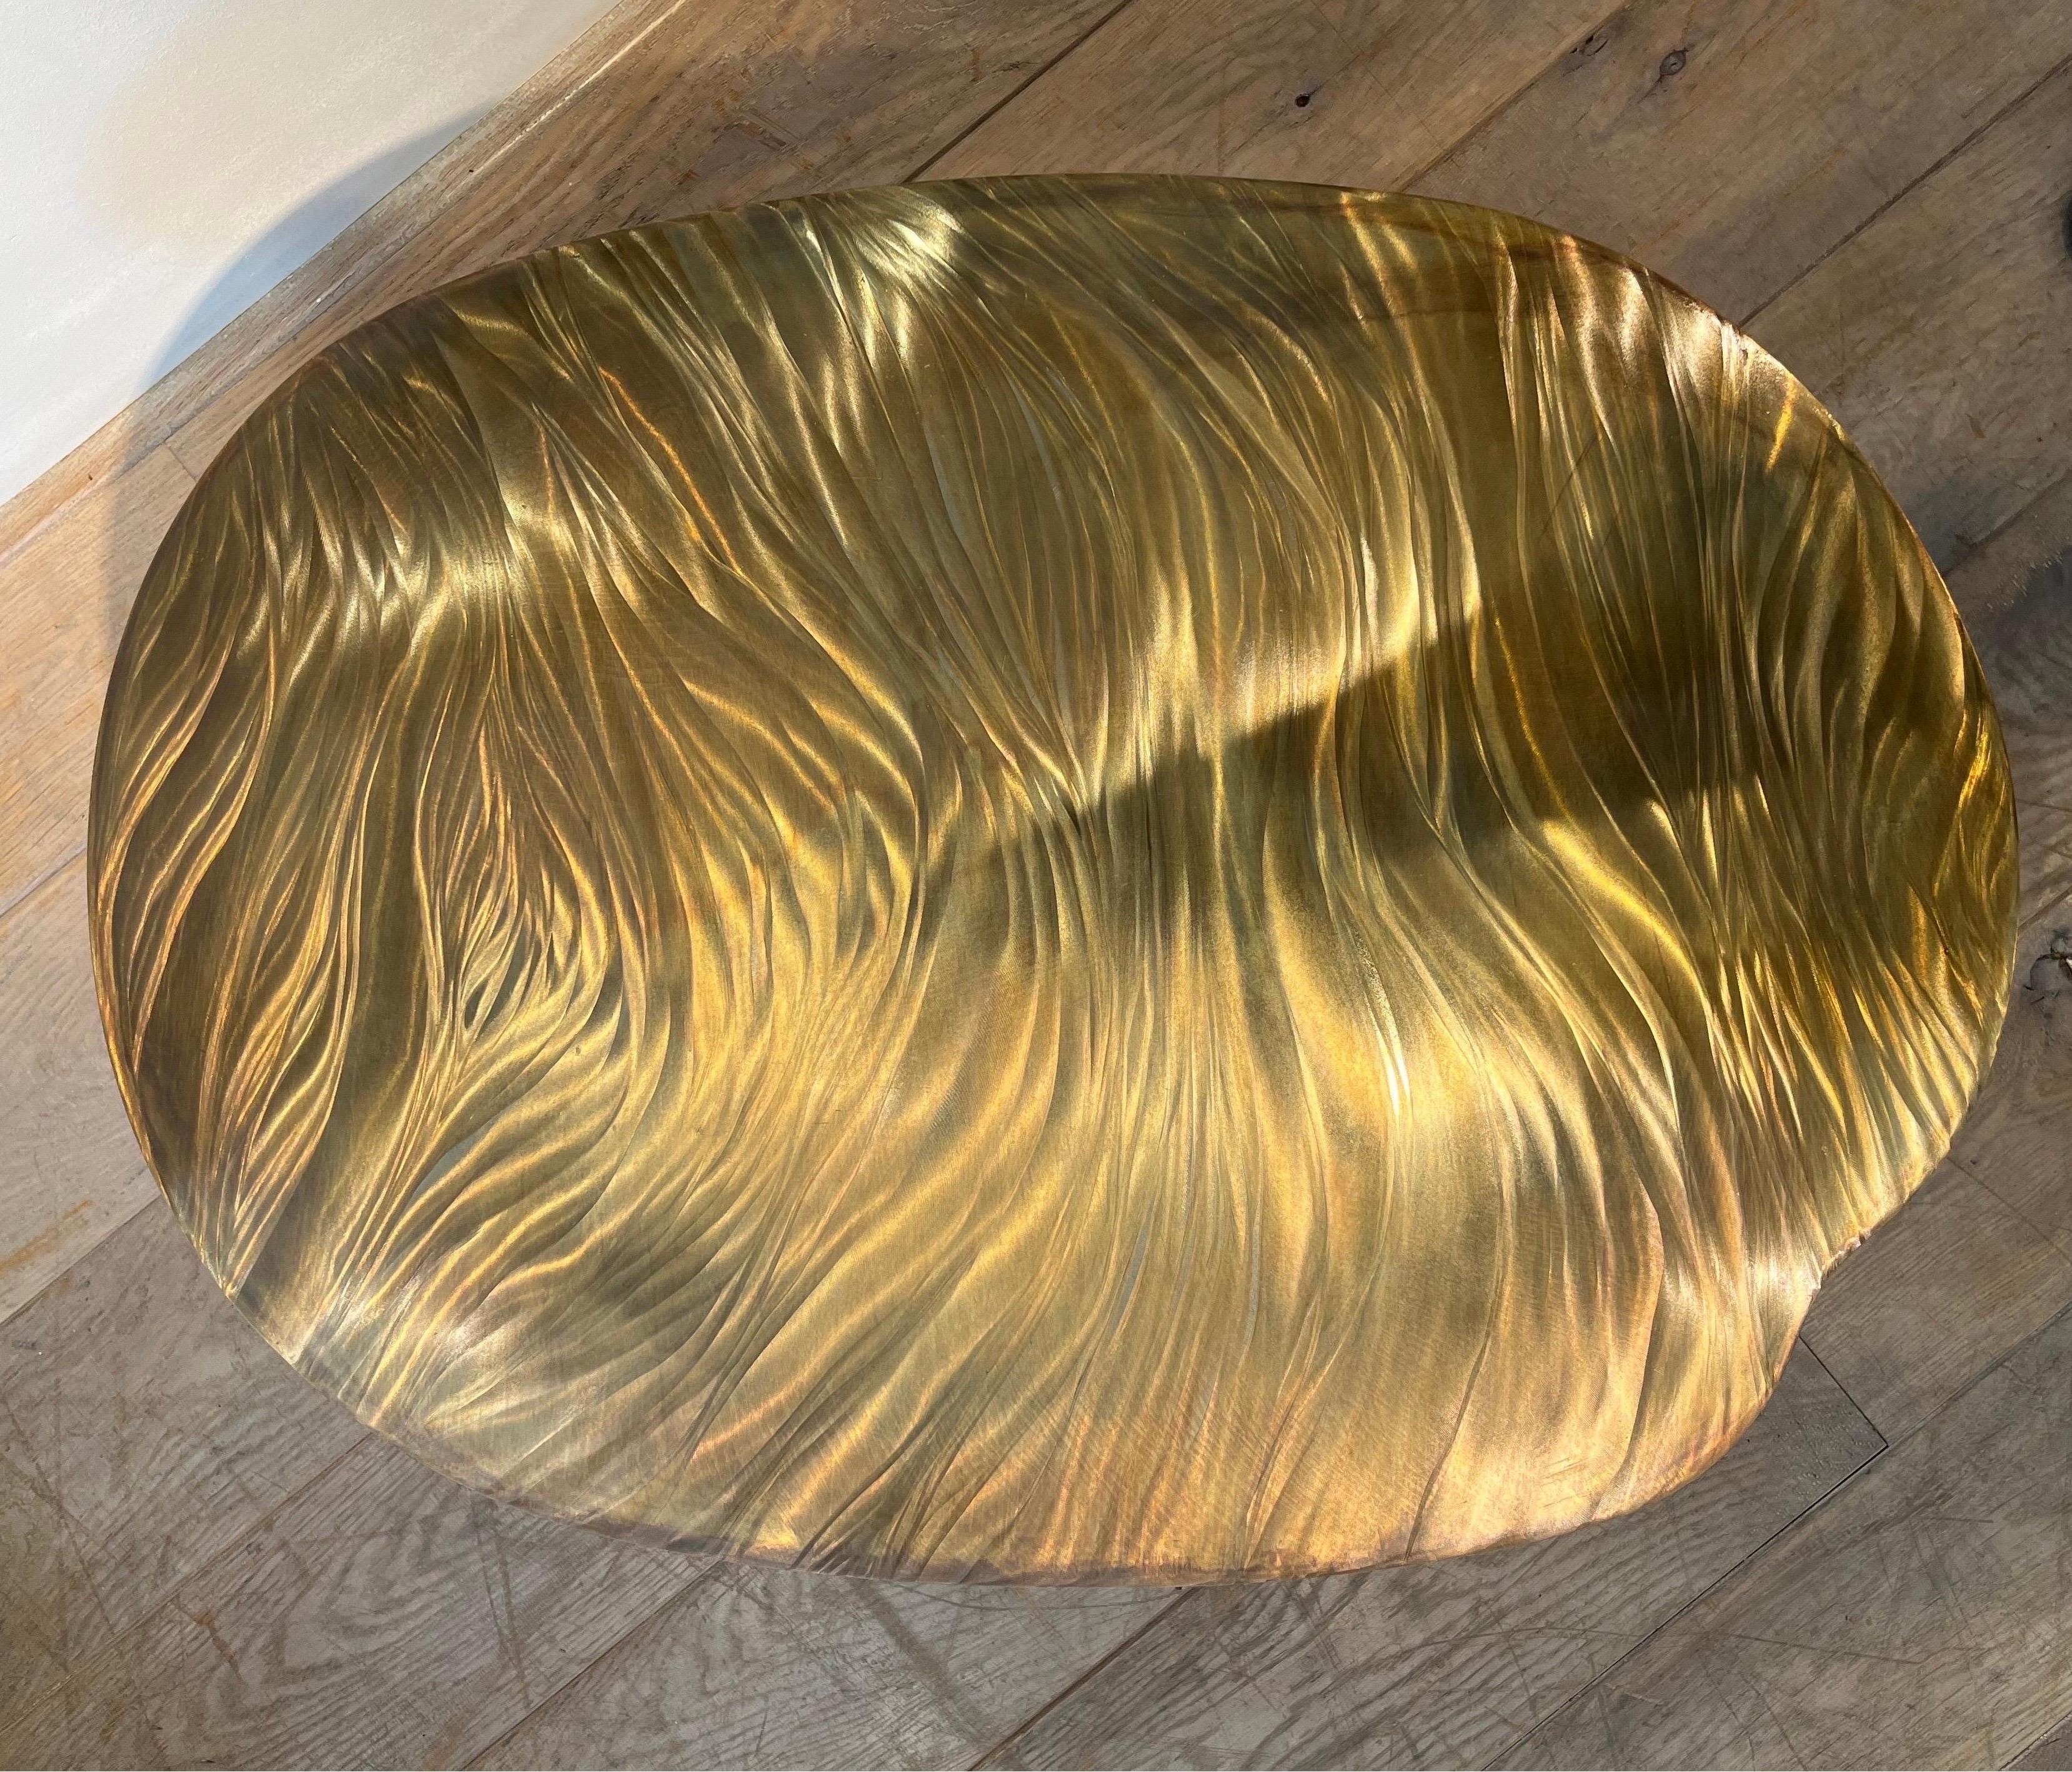 Christian Krekels is a Belgian designer who created decorative furniture from the 1970s. The present table is in brass, probably worked with acid and tool engraving technique. The shape is free formed. The design is abstract and has an interesting 